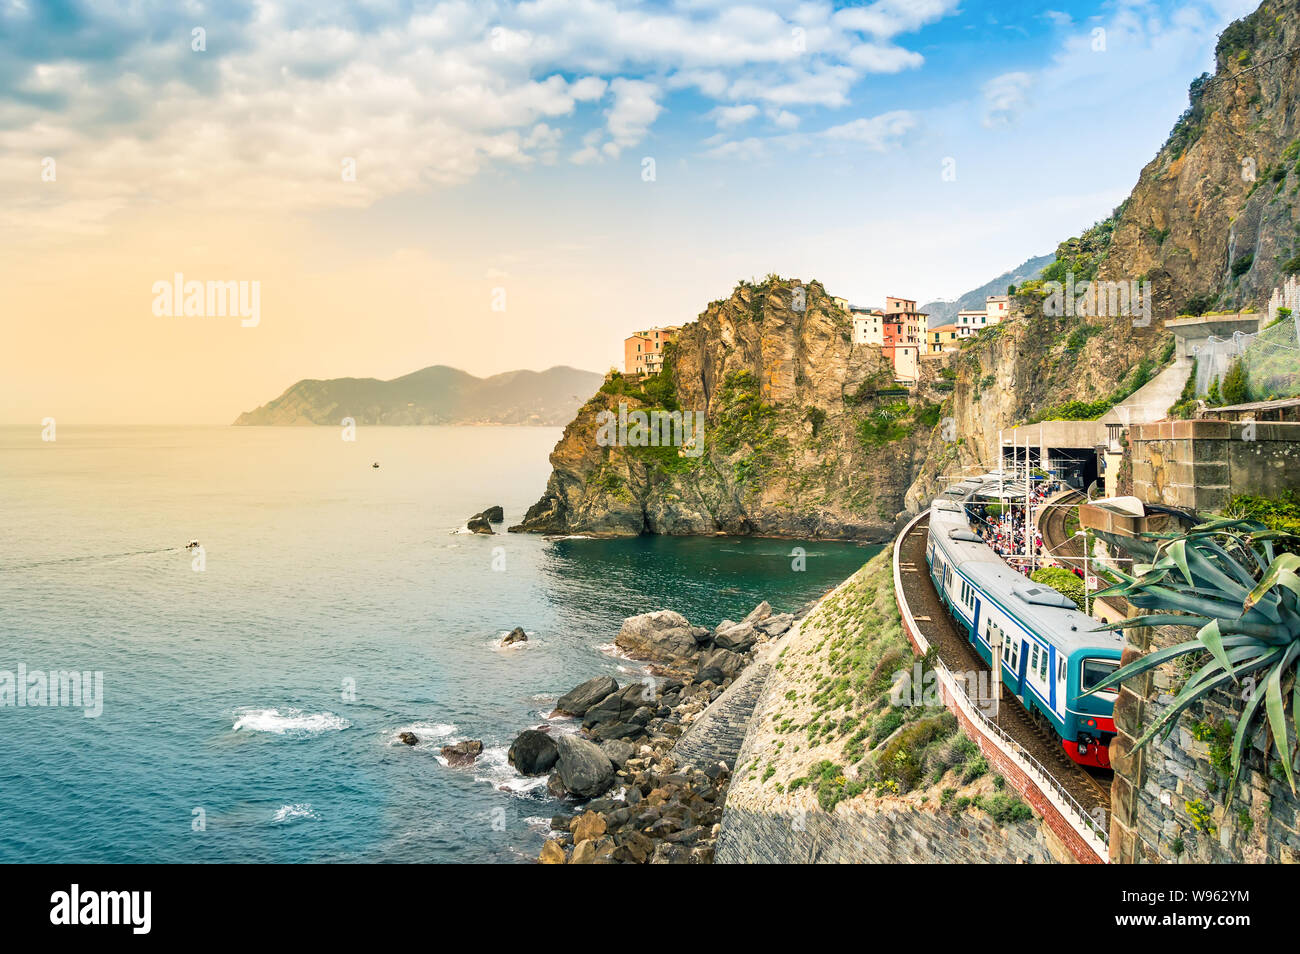 Manarola, Cinque Terre - train station in small village with colorful houses on cliff overlooking sea. Cinque Terre National Park with rugged coastlin Stock Photo